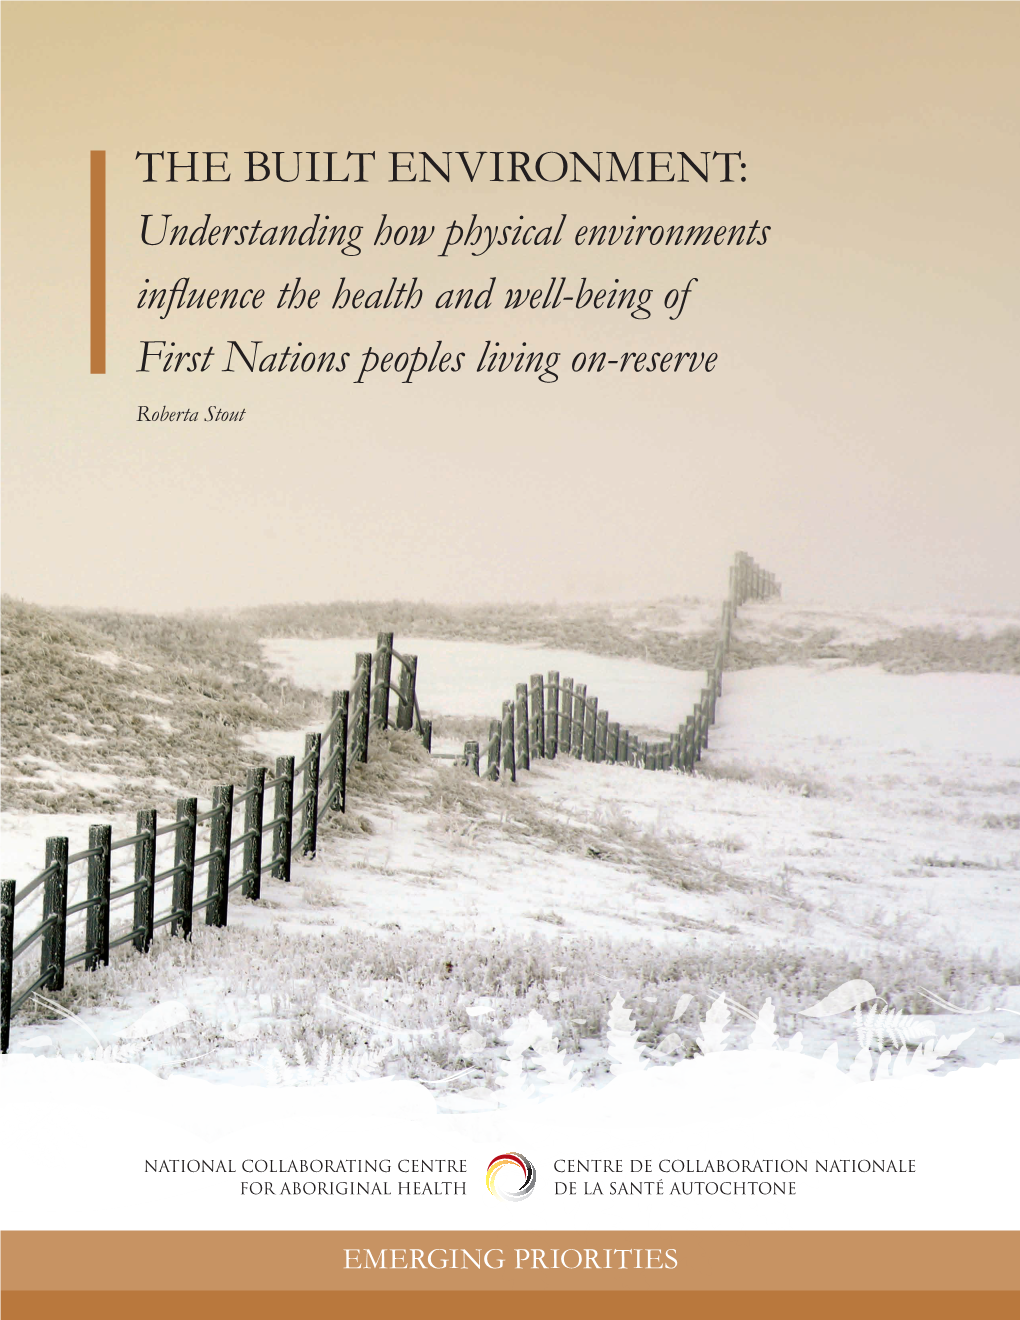 THE BUILT ENVIRONMENT: Understanding How Physical Environments Influence the Health and Well-Being of First Nations Peoples Living On-Reserve Roberta Stout